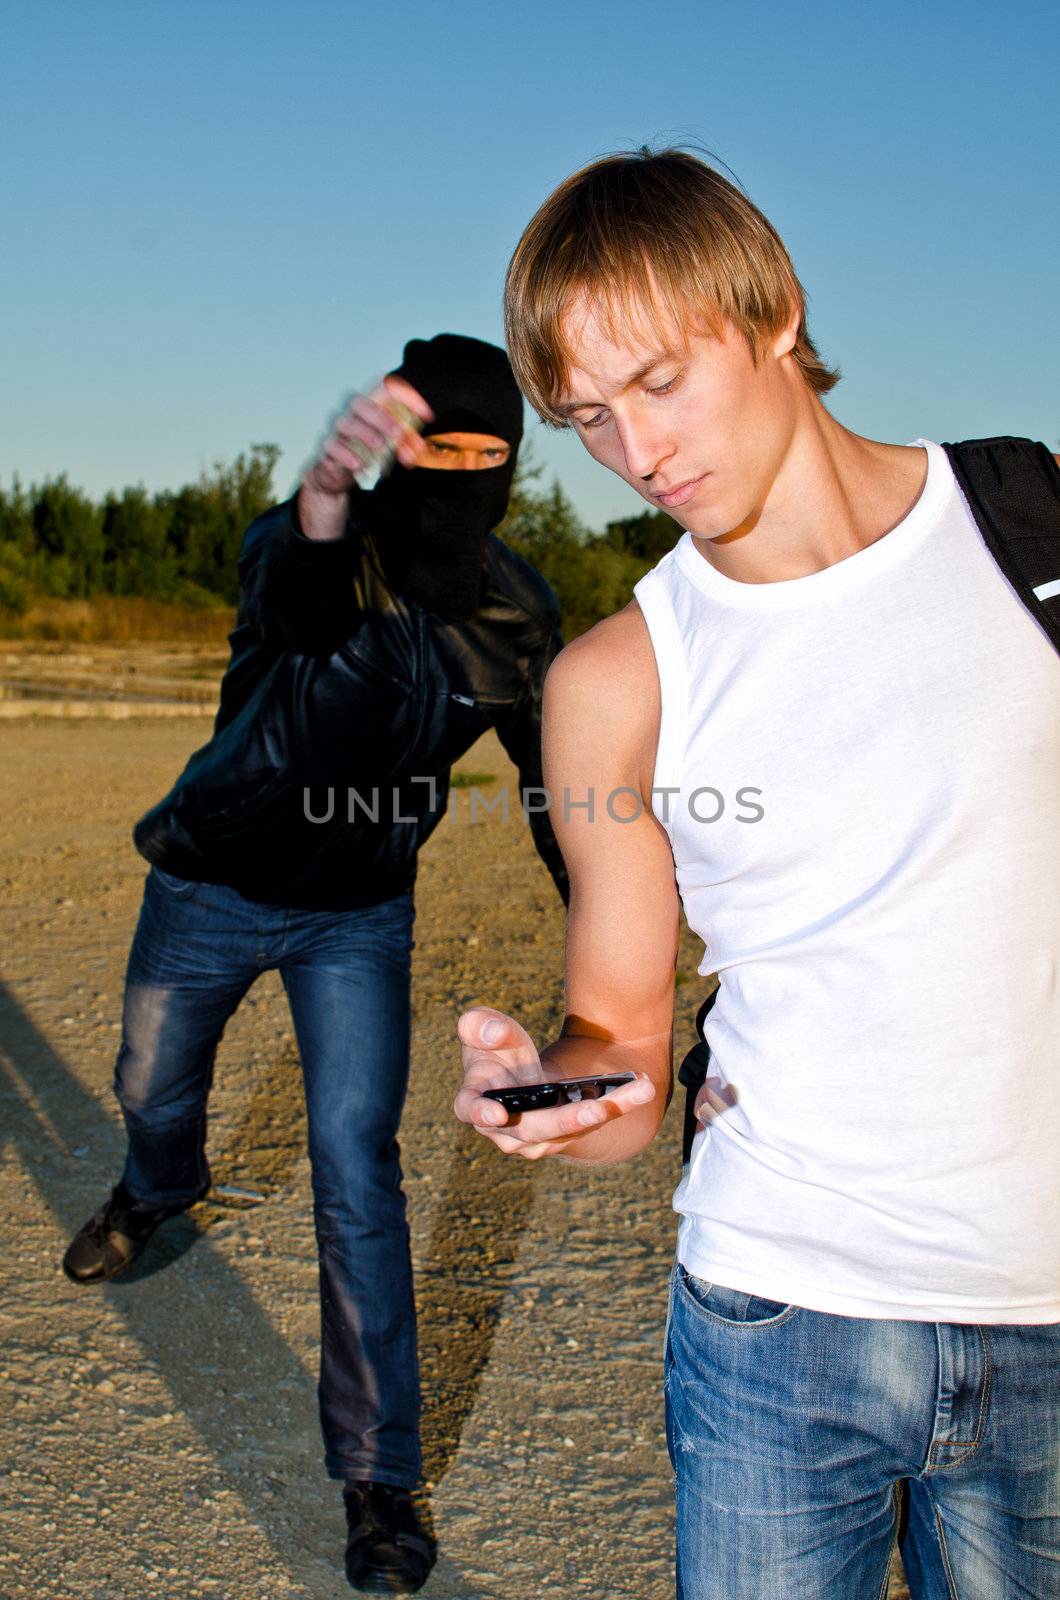 Bandit in mask trying to rob young man